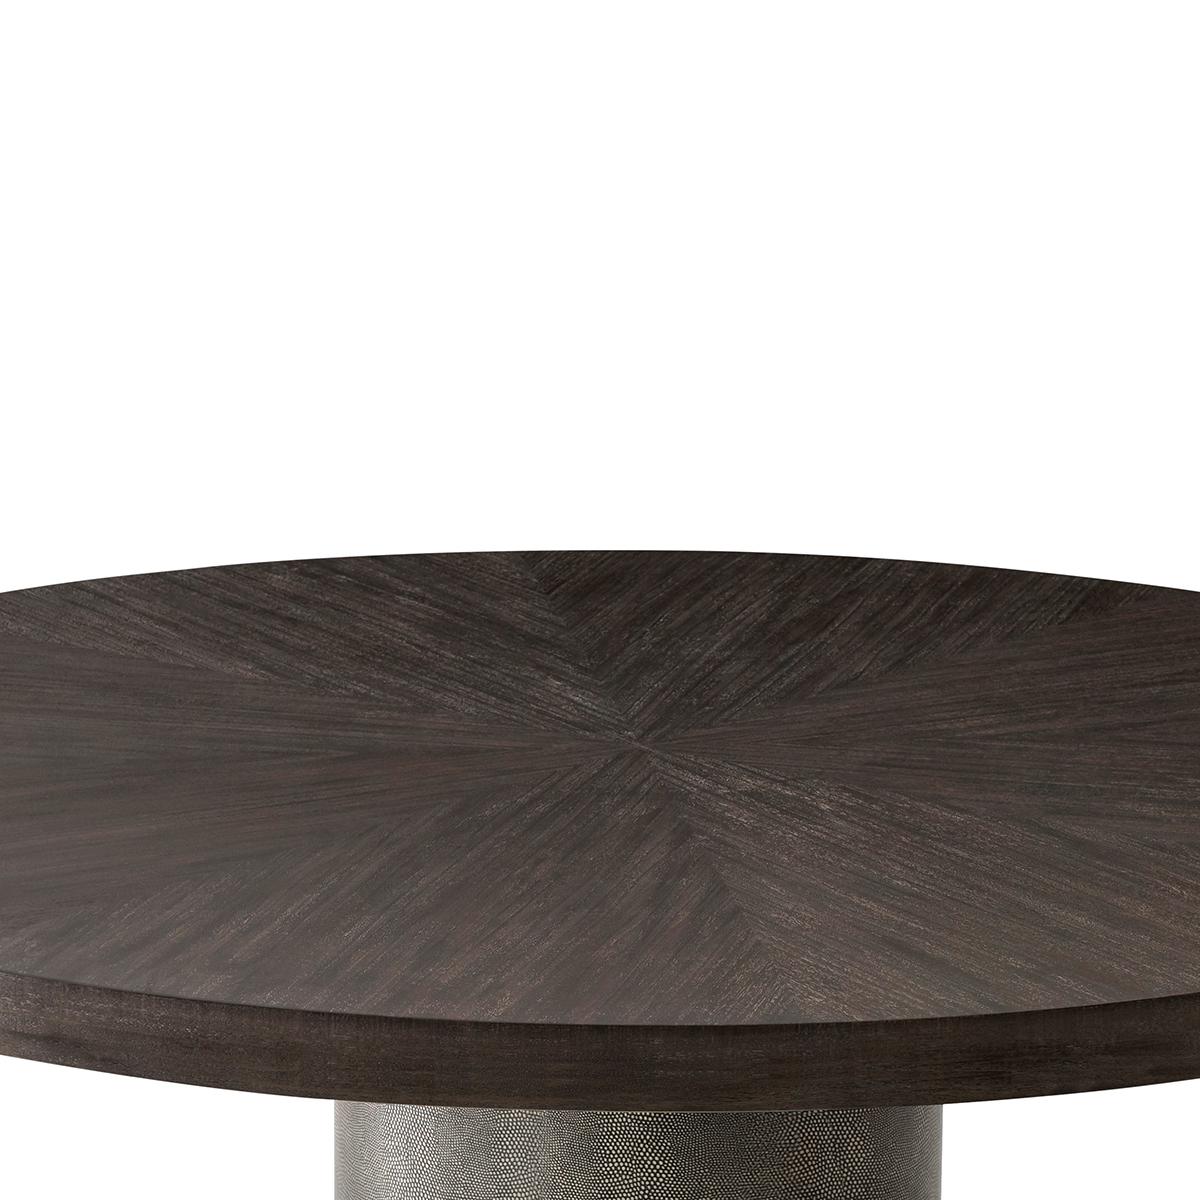 with a sunburst inlaid rowan primavera veneered circular top raised on a cylindrical column pedestal wrapped in Tempest embossed leather, with brass accents and a veneered platform base.

Dimensions: 60 